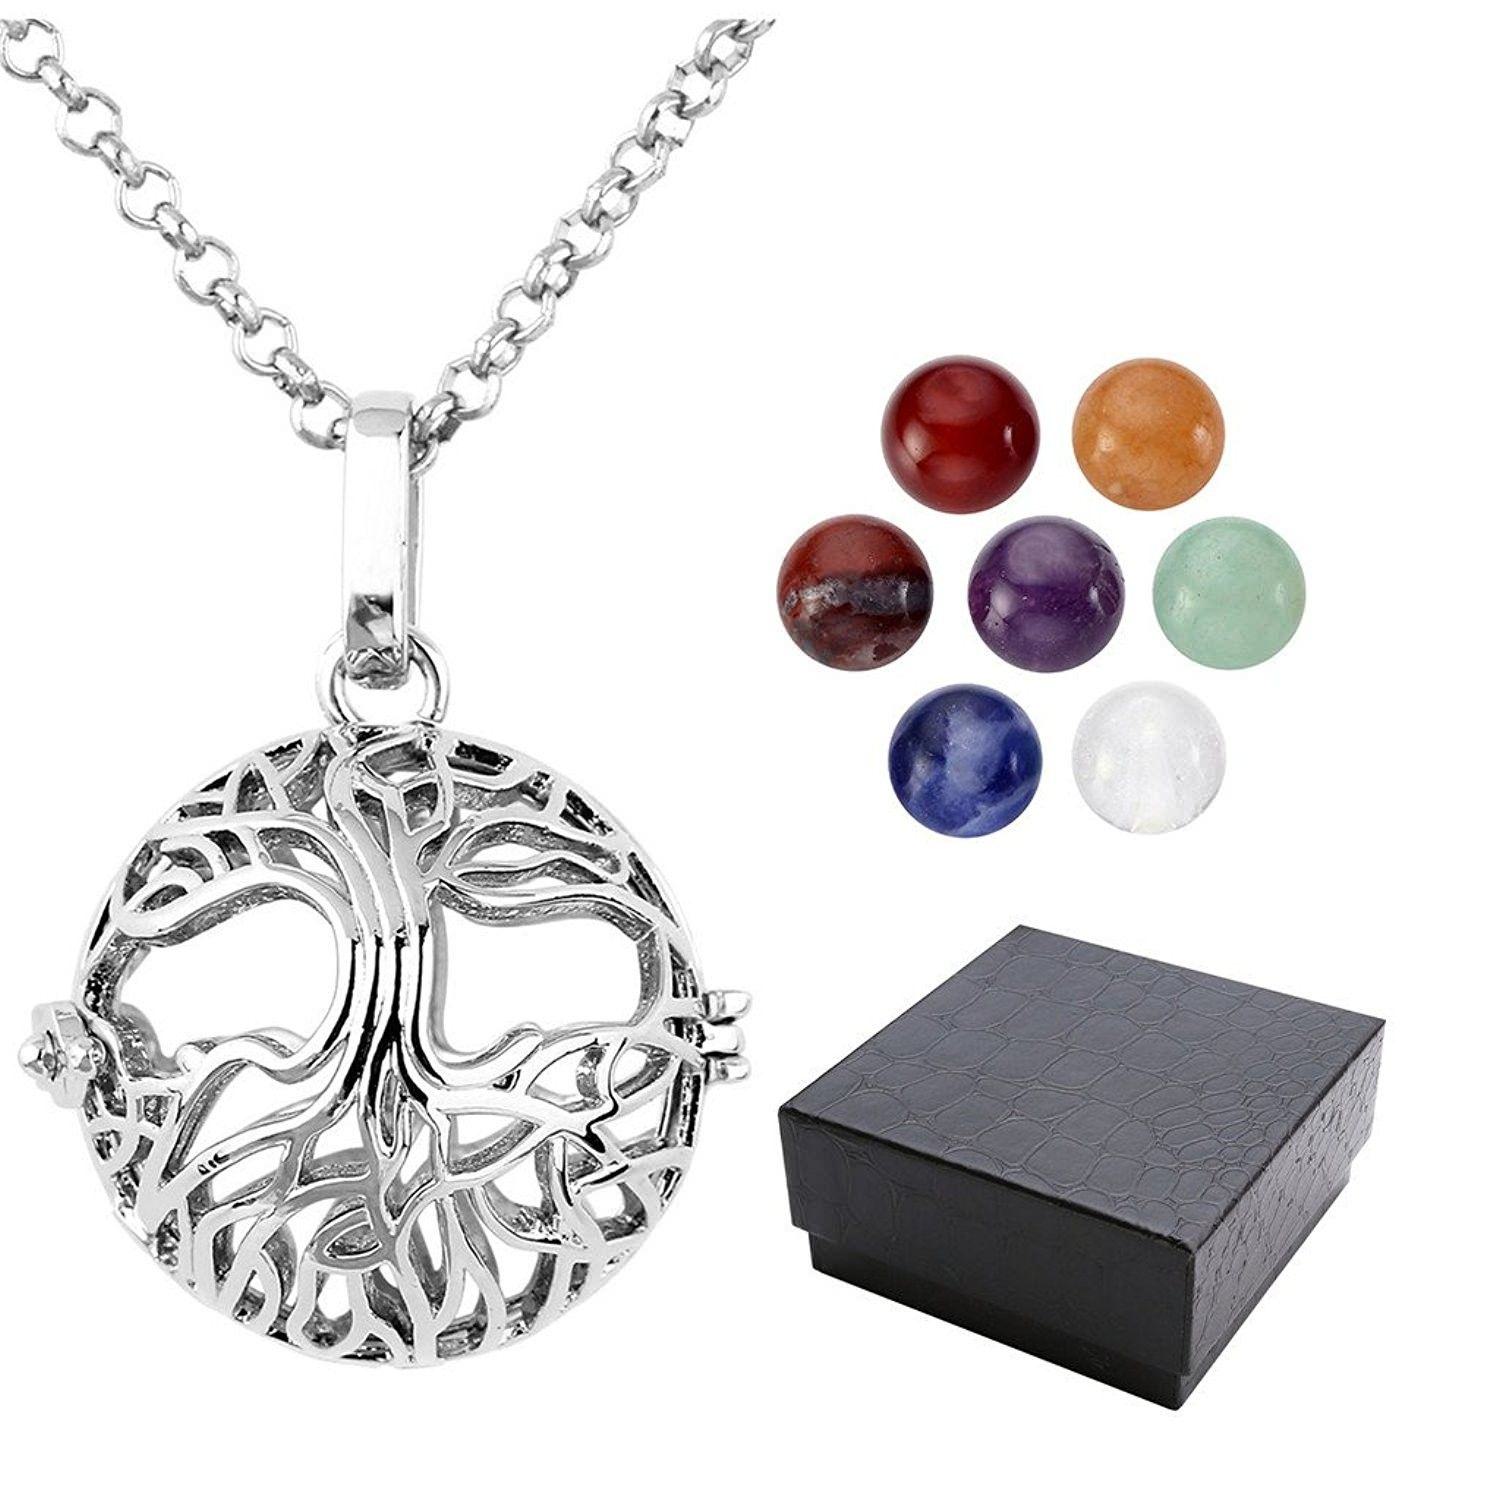 tree ball openwork essential oil diffuser necklace diffuser lockets wholesale jewelry lockets aromatherapy necklaces lava volcanic